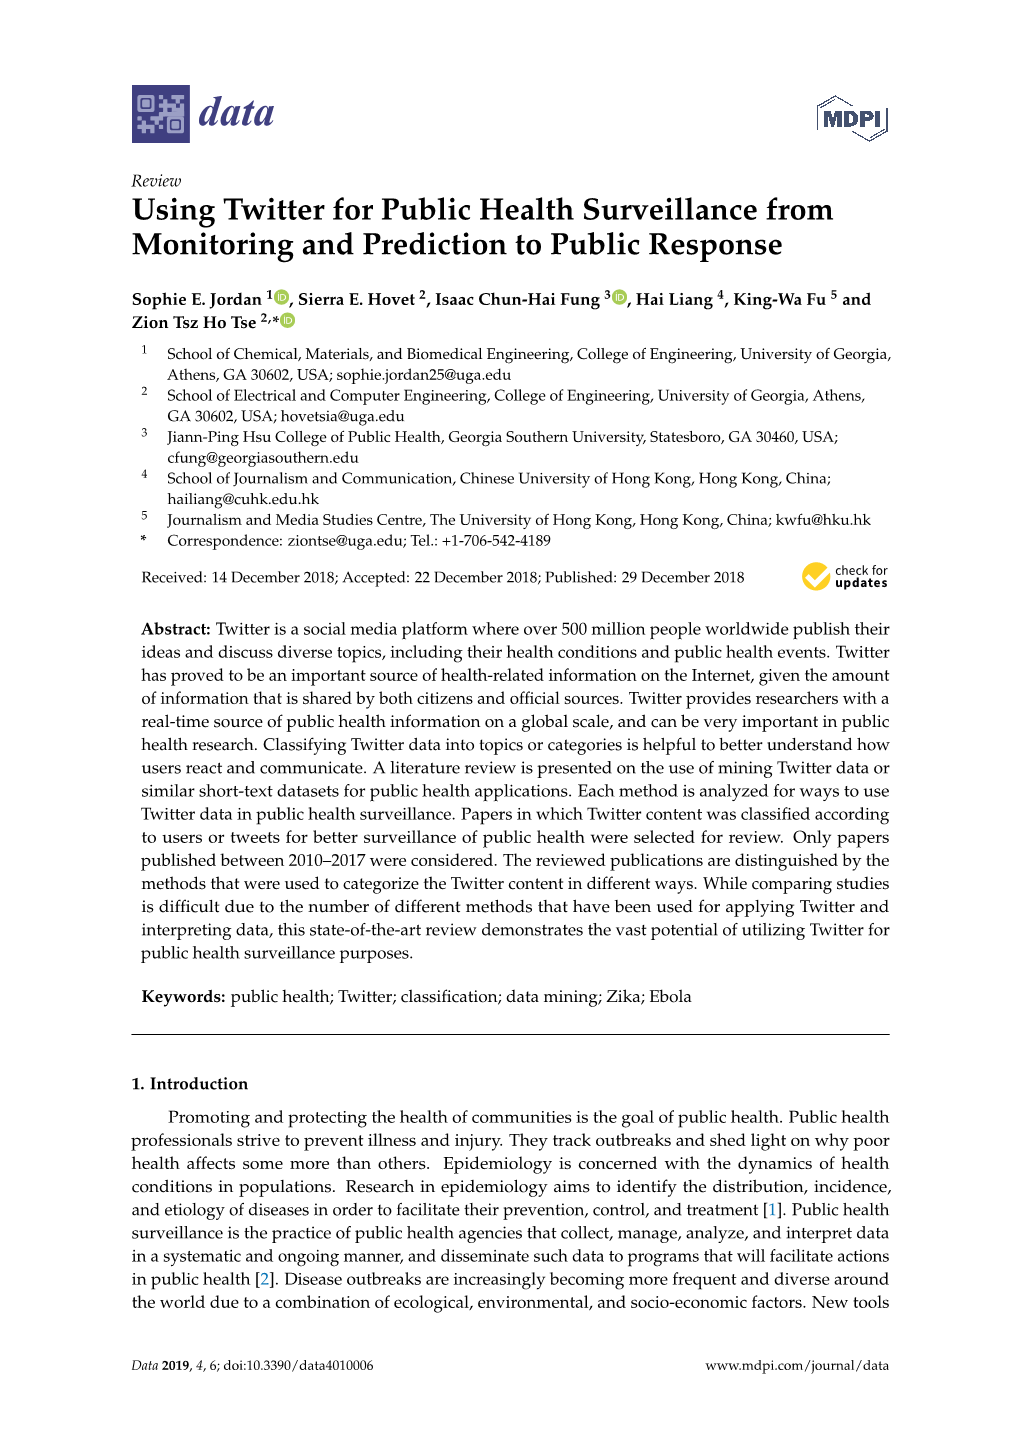 Using Twitter for Public Health Surveillance from Monitoring and Prediction to Public Response